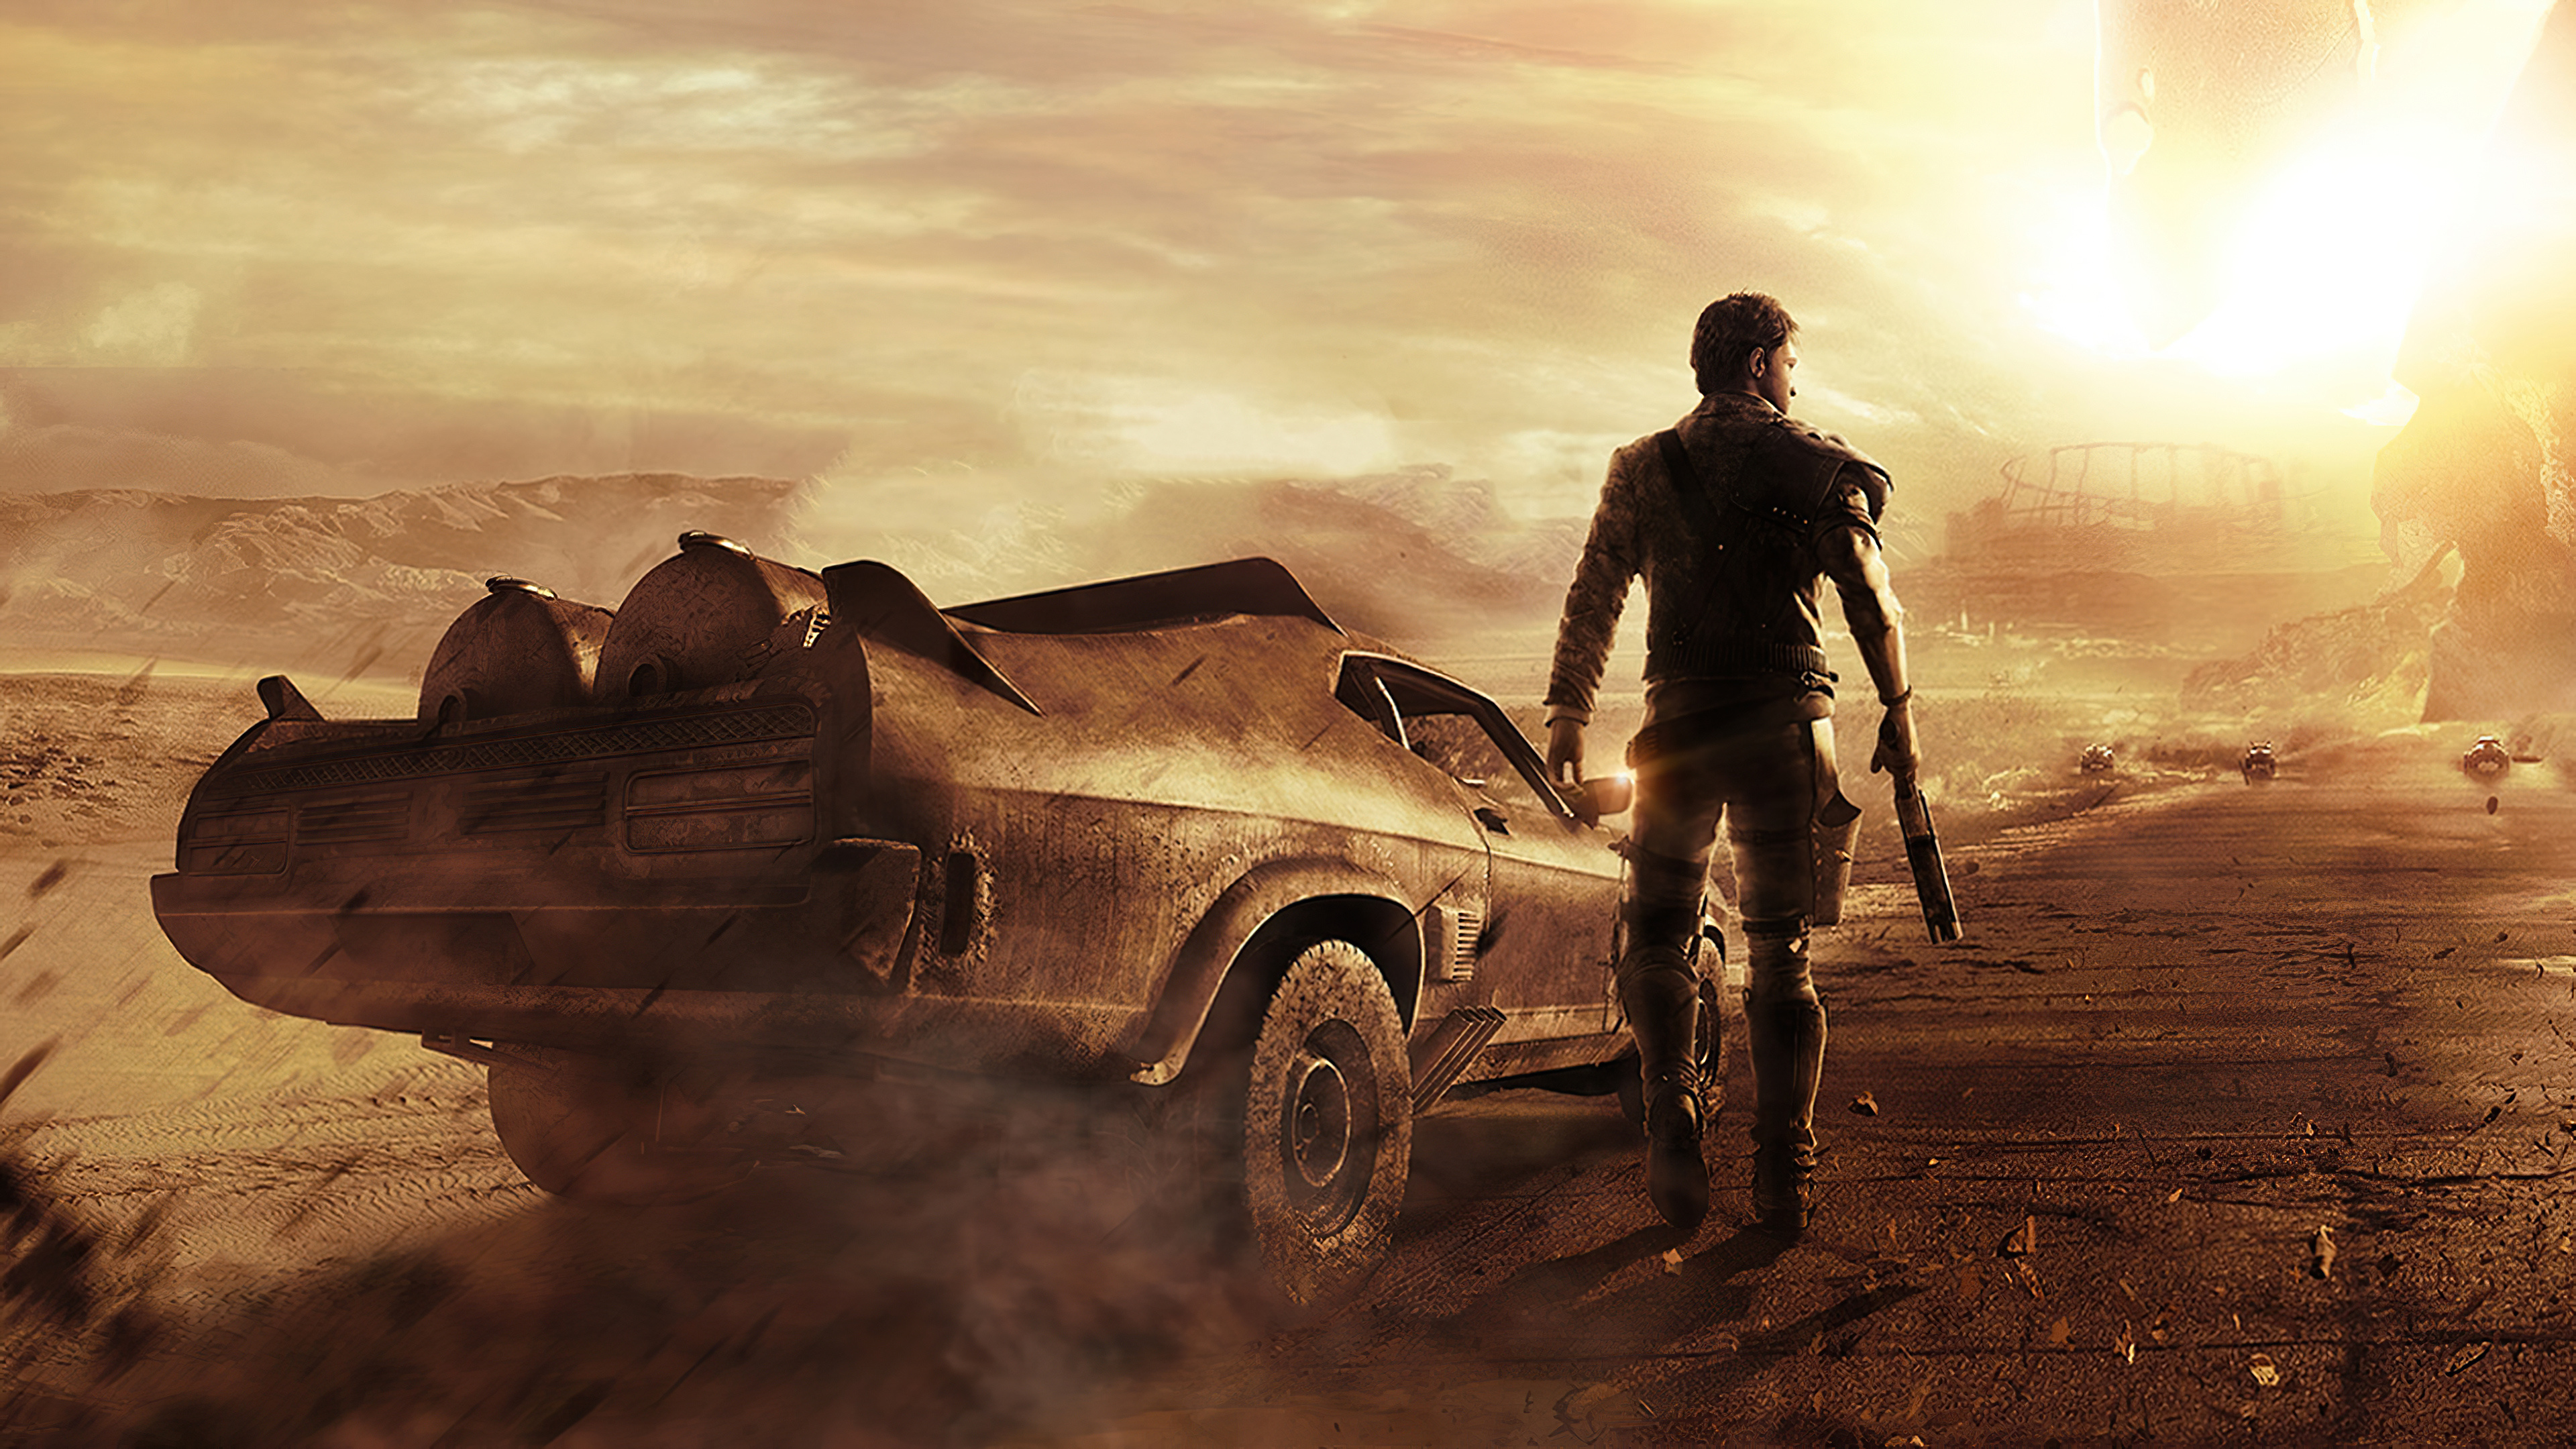 Mad Max: An action-adventure video game, The lone warrior in a savage post-apocalyptic world. 3840x2160 4K Wallpaper.